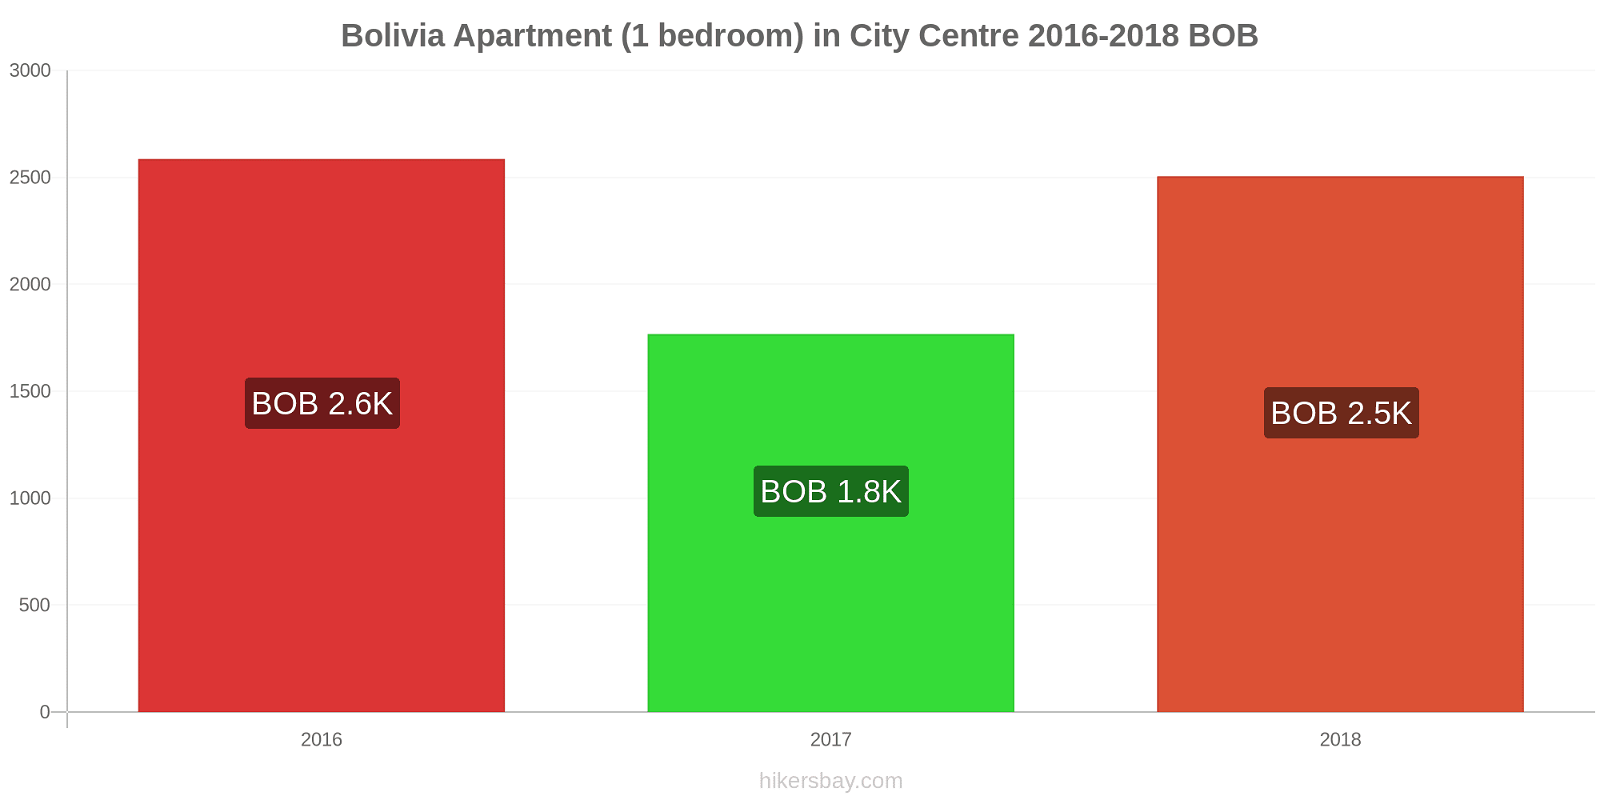 Bolivia price changes Apartment (1 bedroom) in City Centre hikersbay.com